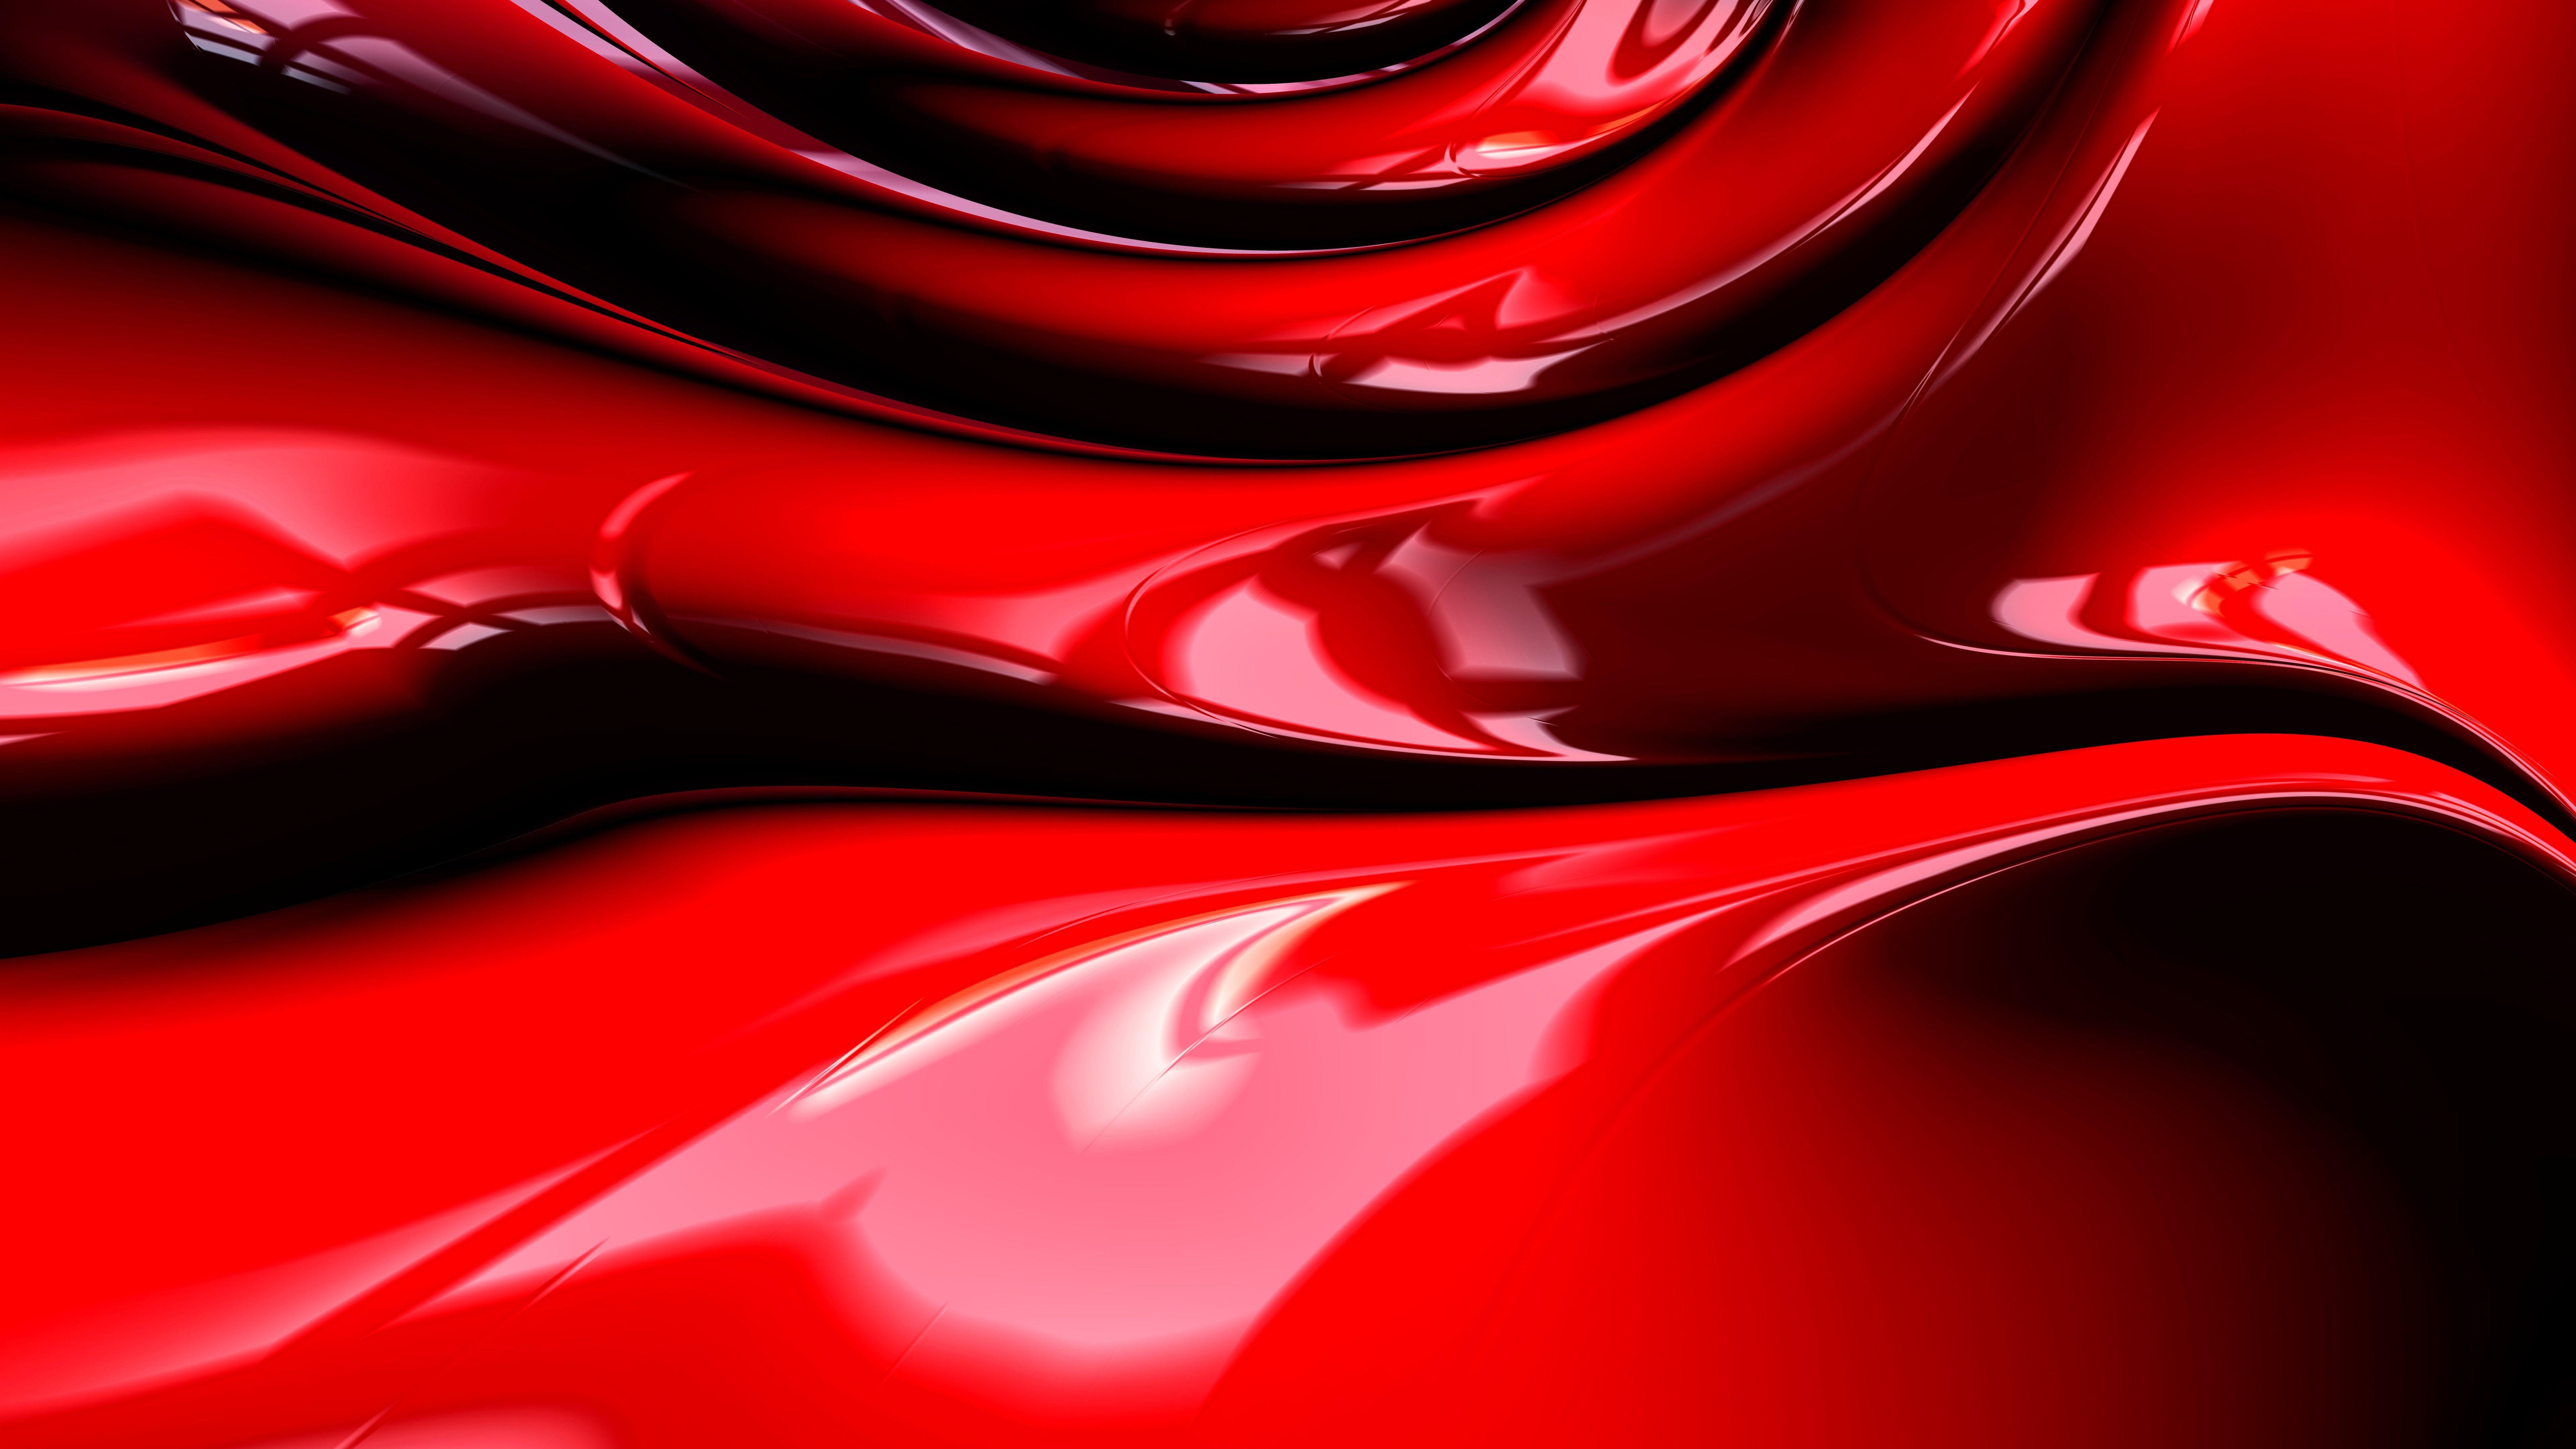  Red  8K  Wallpapers  Top Free Red  8K  Backgrounds 